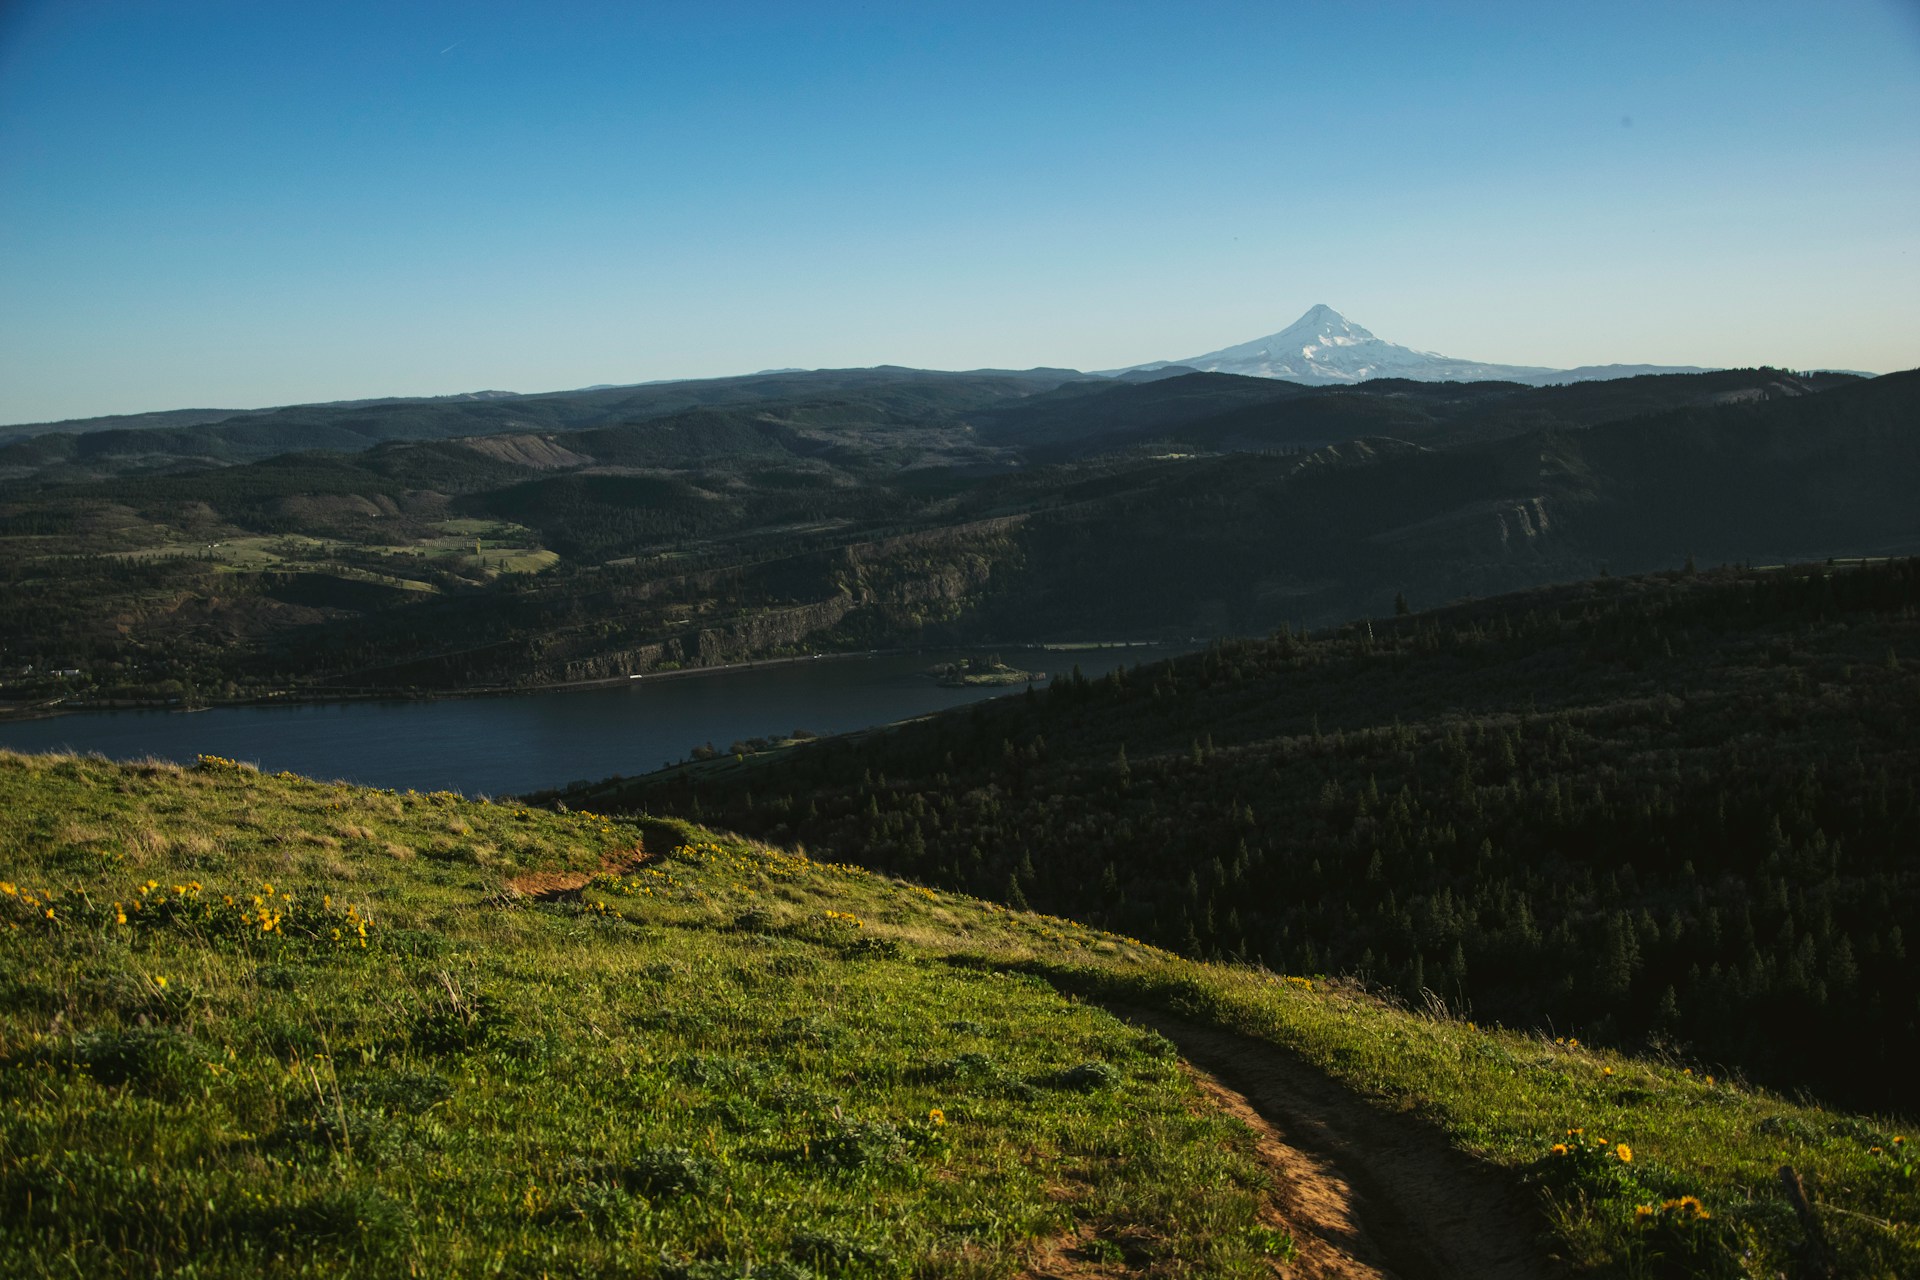 View of the Gorge and Mt. Hood in the distance